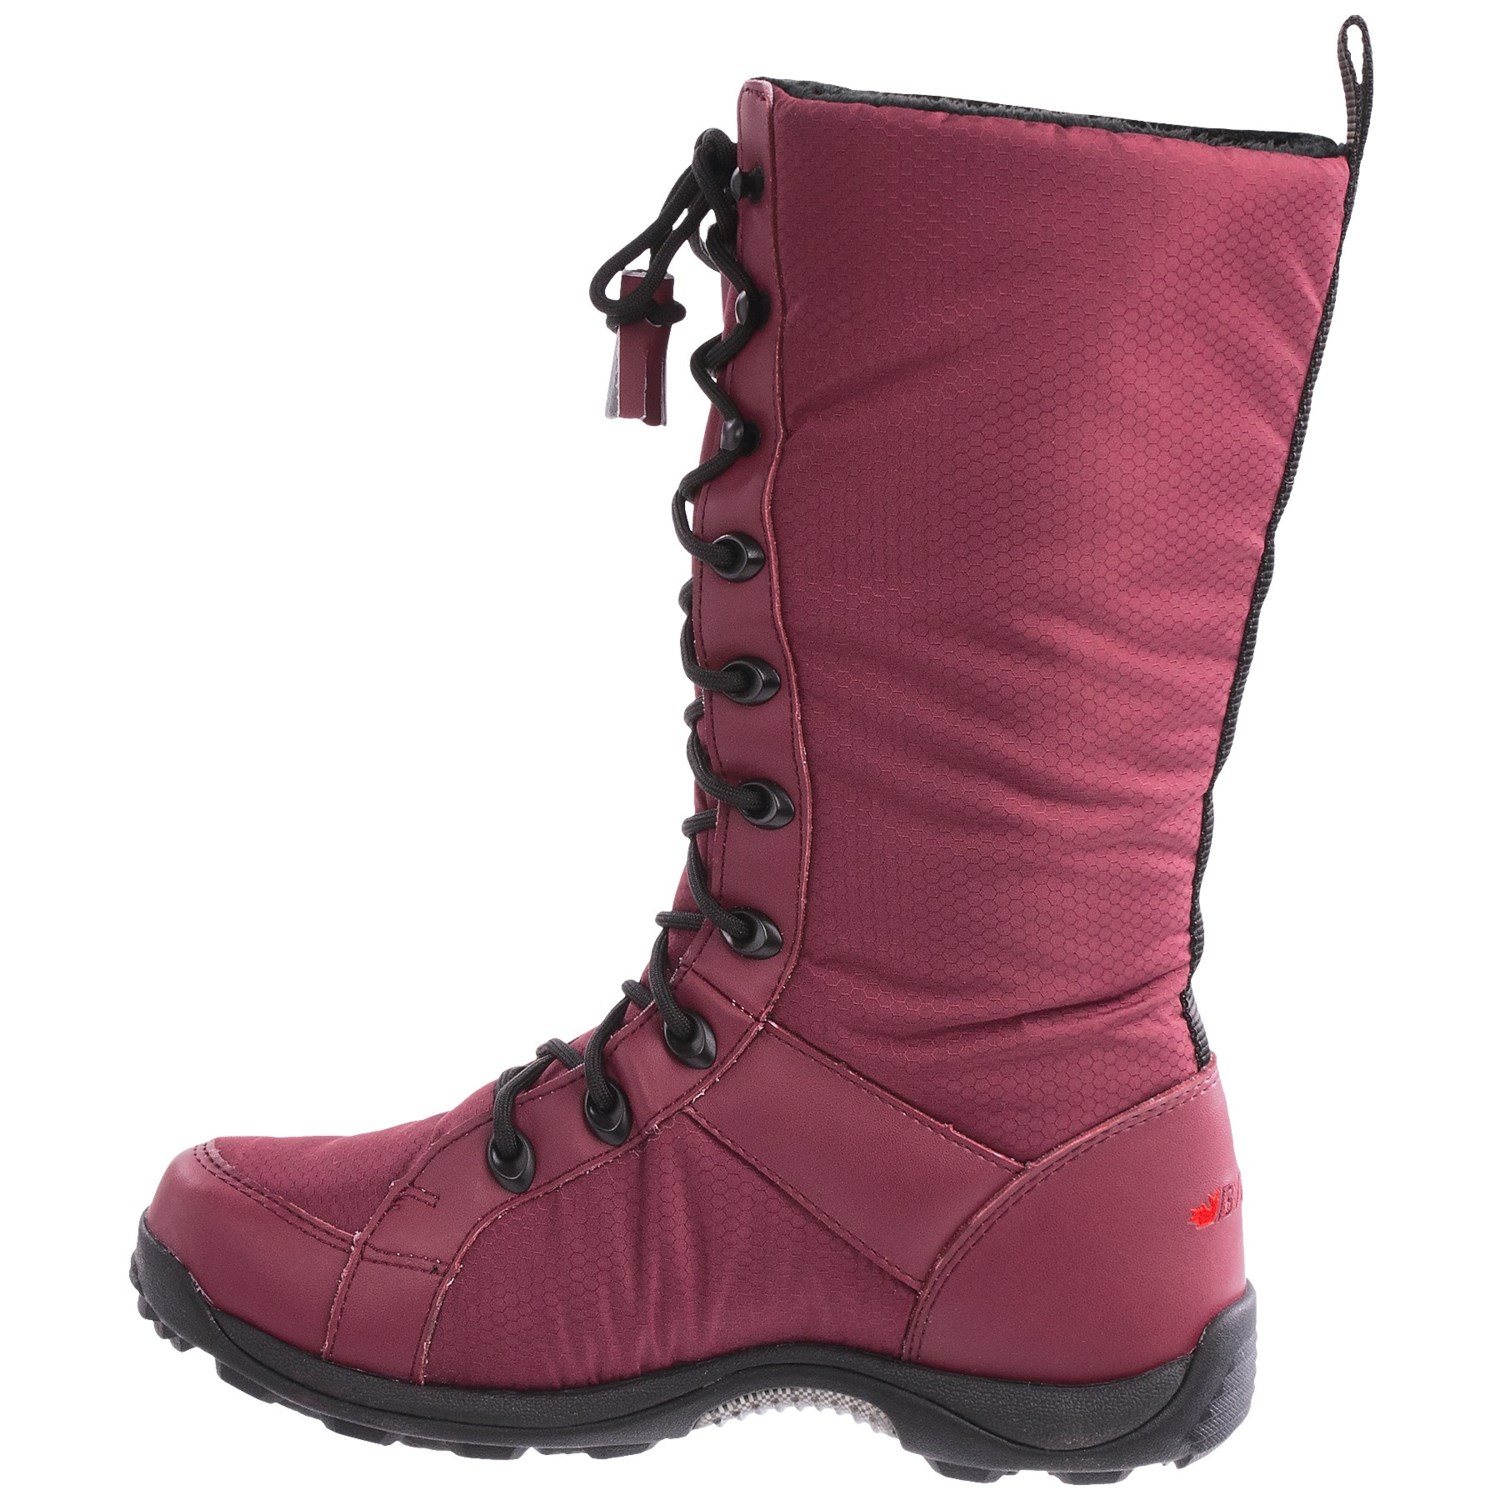 Baffin Chicago Winter Boots (For Women) - Save 58%